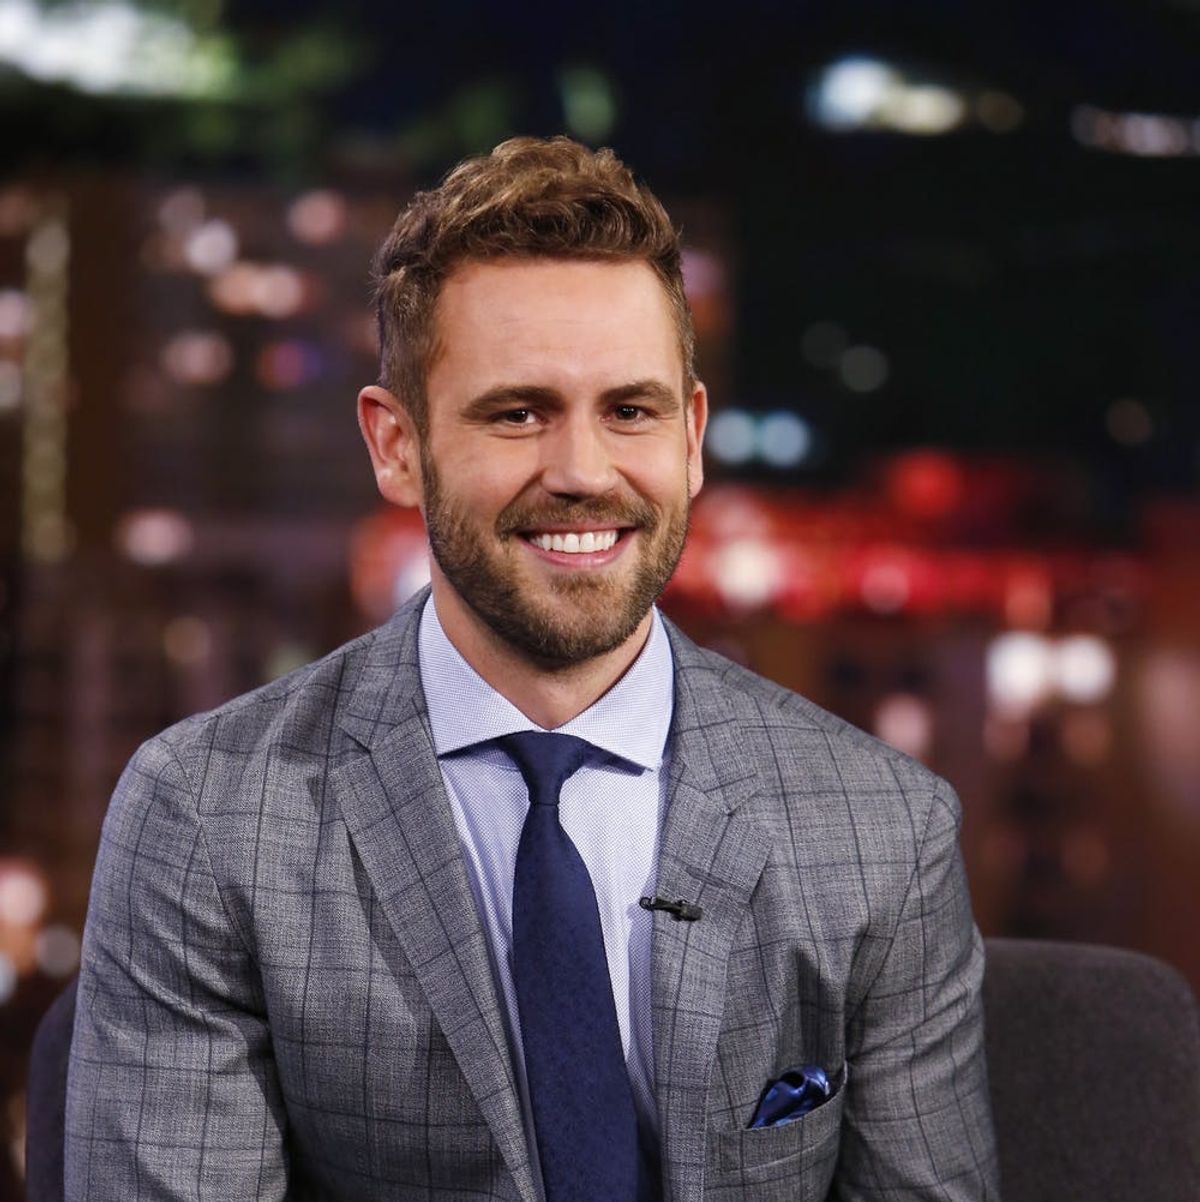 The New Bachelorette Announcement Just Made Things WAY More Interesting on the Bachelor